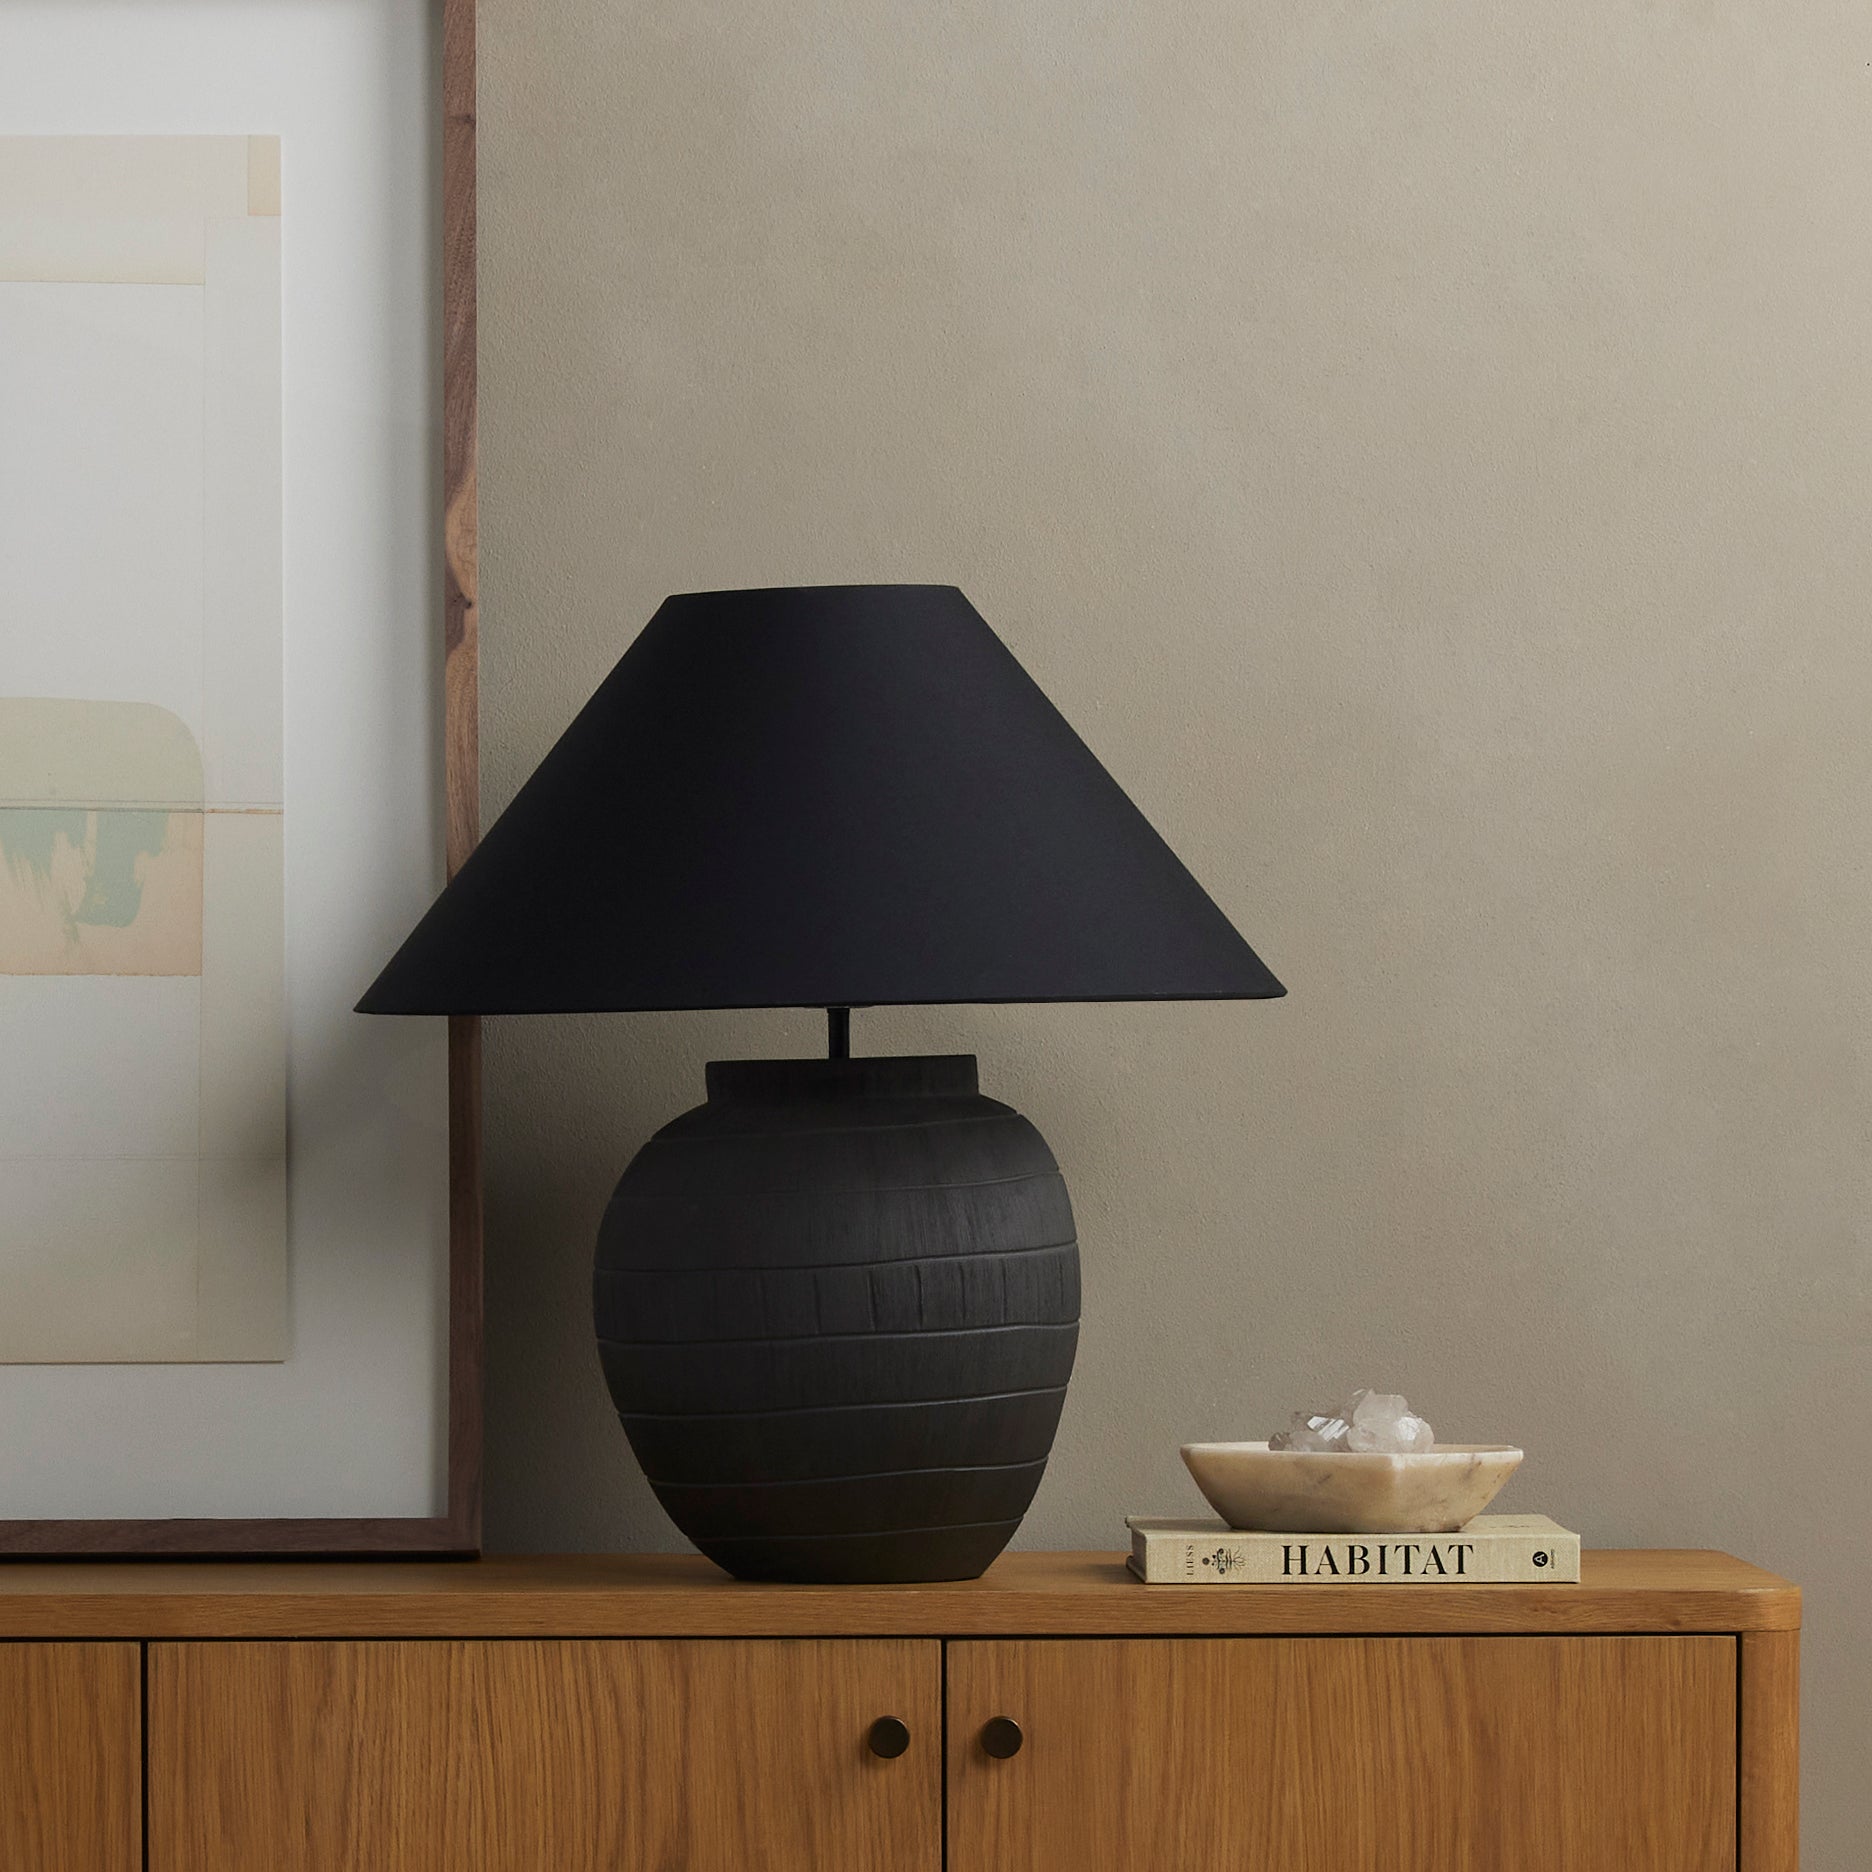 Muji Black Cotton Table Lamp is a hand-shaped black talavera lamp with handle-like detailing pairs with a tapered cotton shade in black. Amethyst Home provides interior design services, furniture, rugs, and lighting in the Miami metro area.